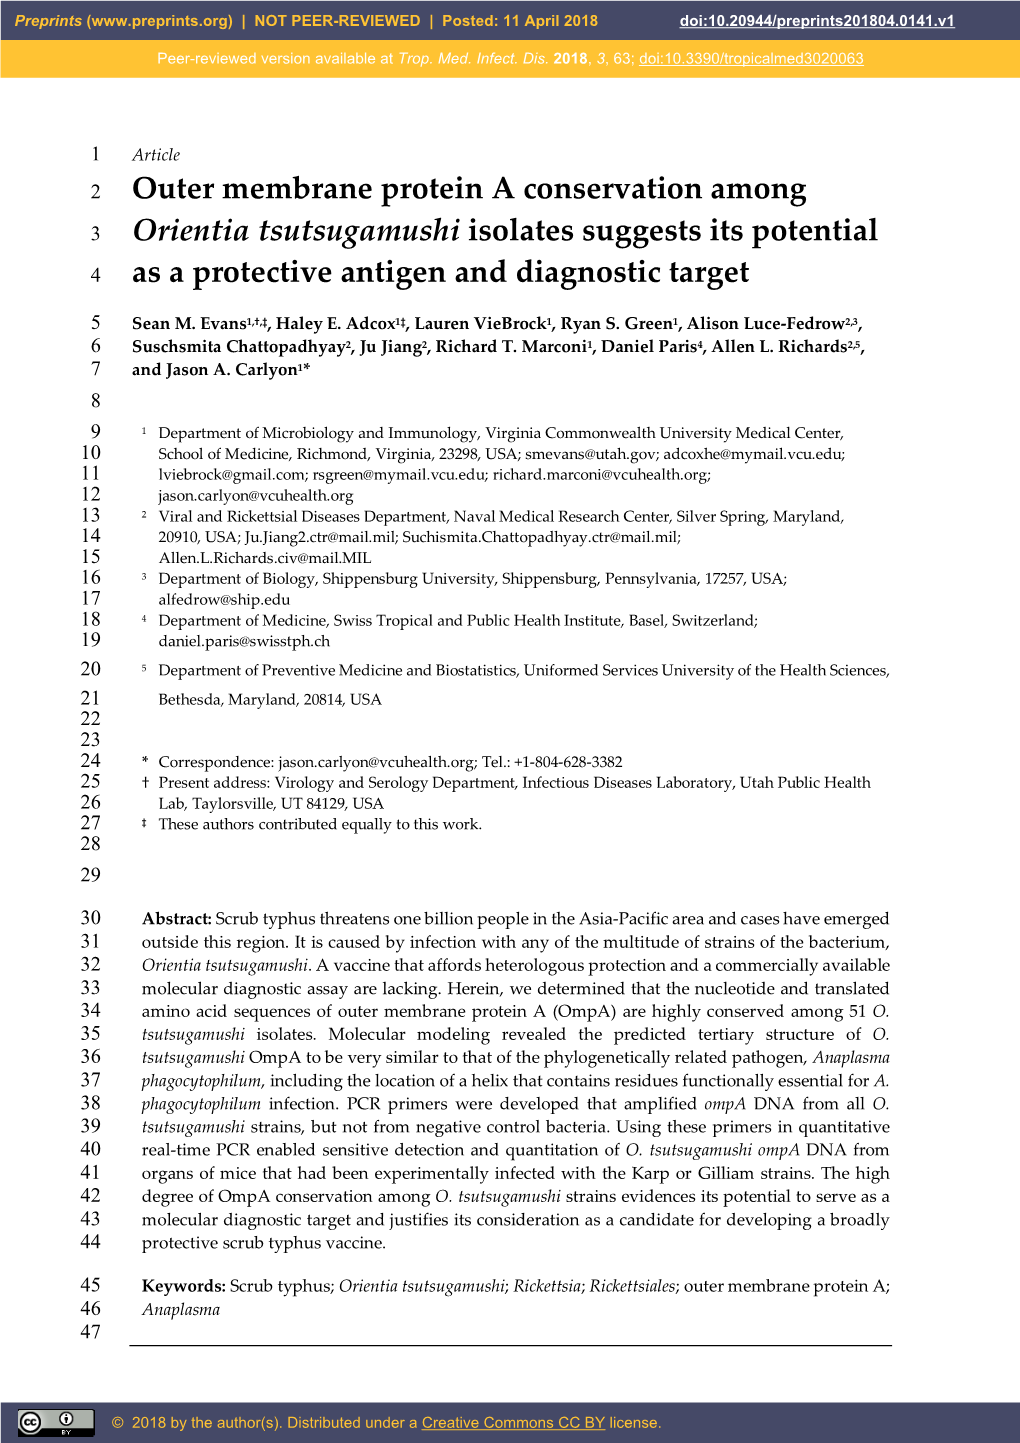 Outer Membrane Protein a Conservation Among 3 Orientia Tsutsugamushi Isolates Suggests Its Potential 4 As a Protective Antigen and Diagnostic Target